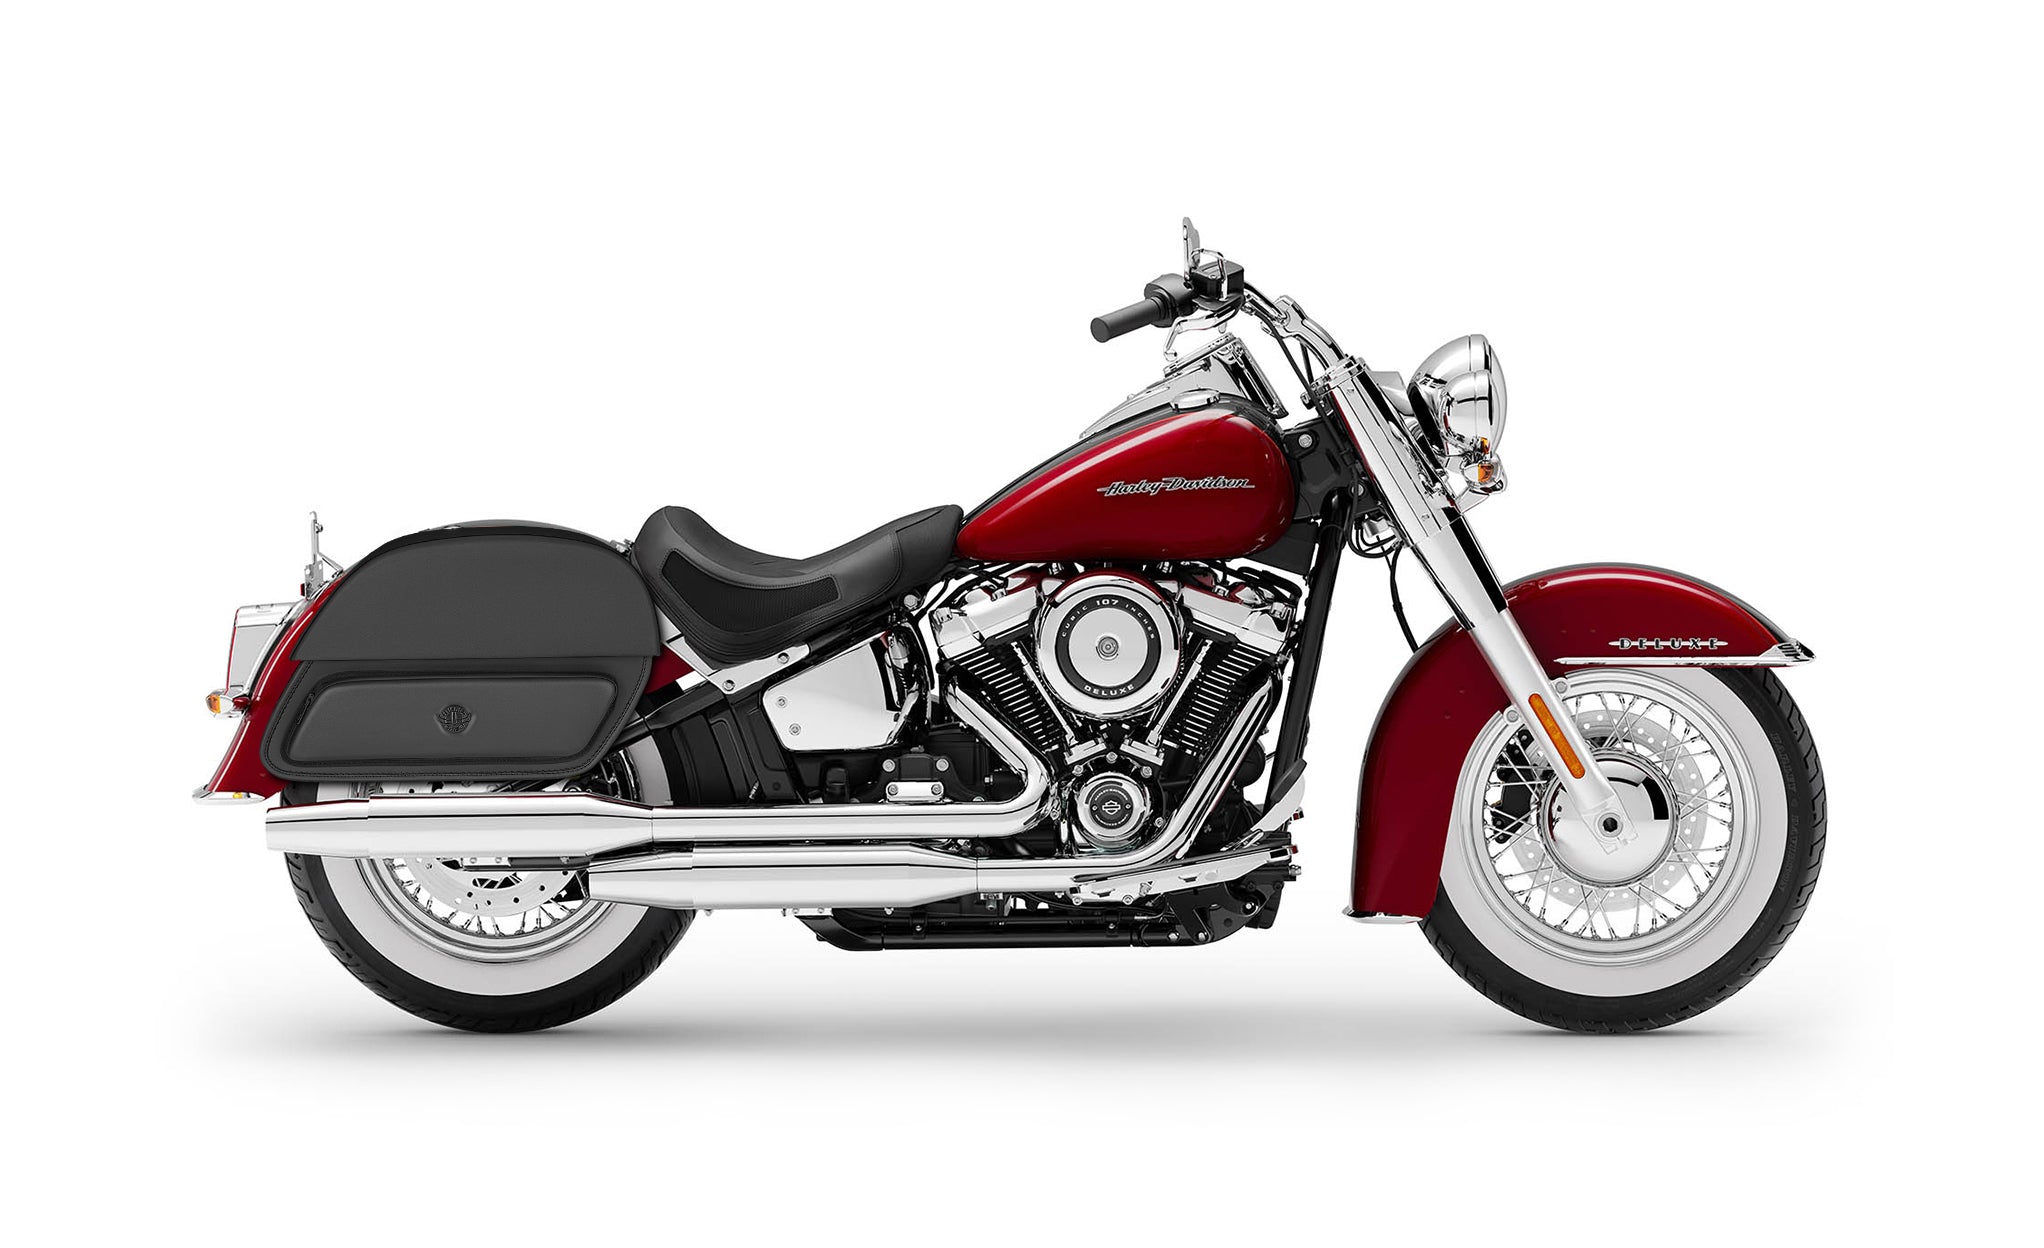 33L - Pantheon Large Saddlebags for Harley Softail Deluxe FLDE @expand